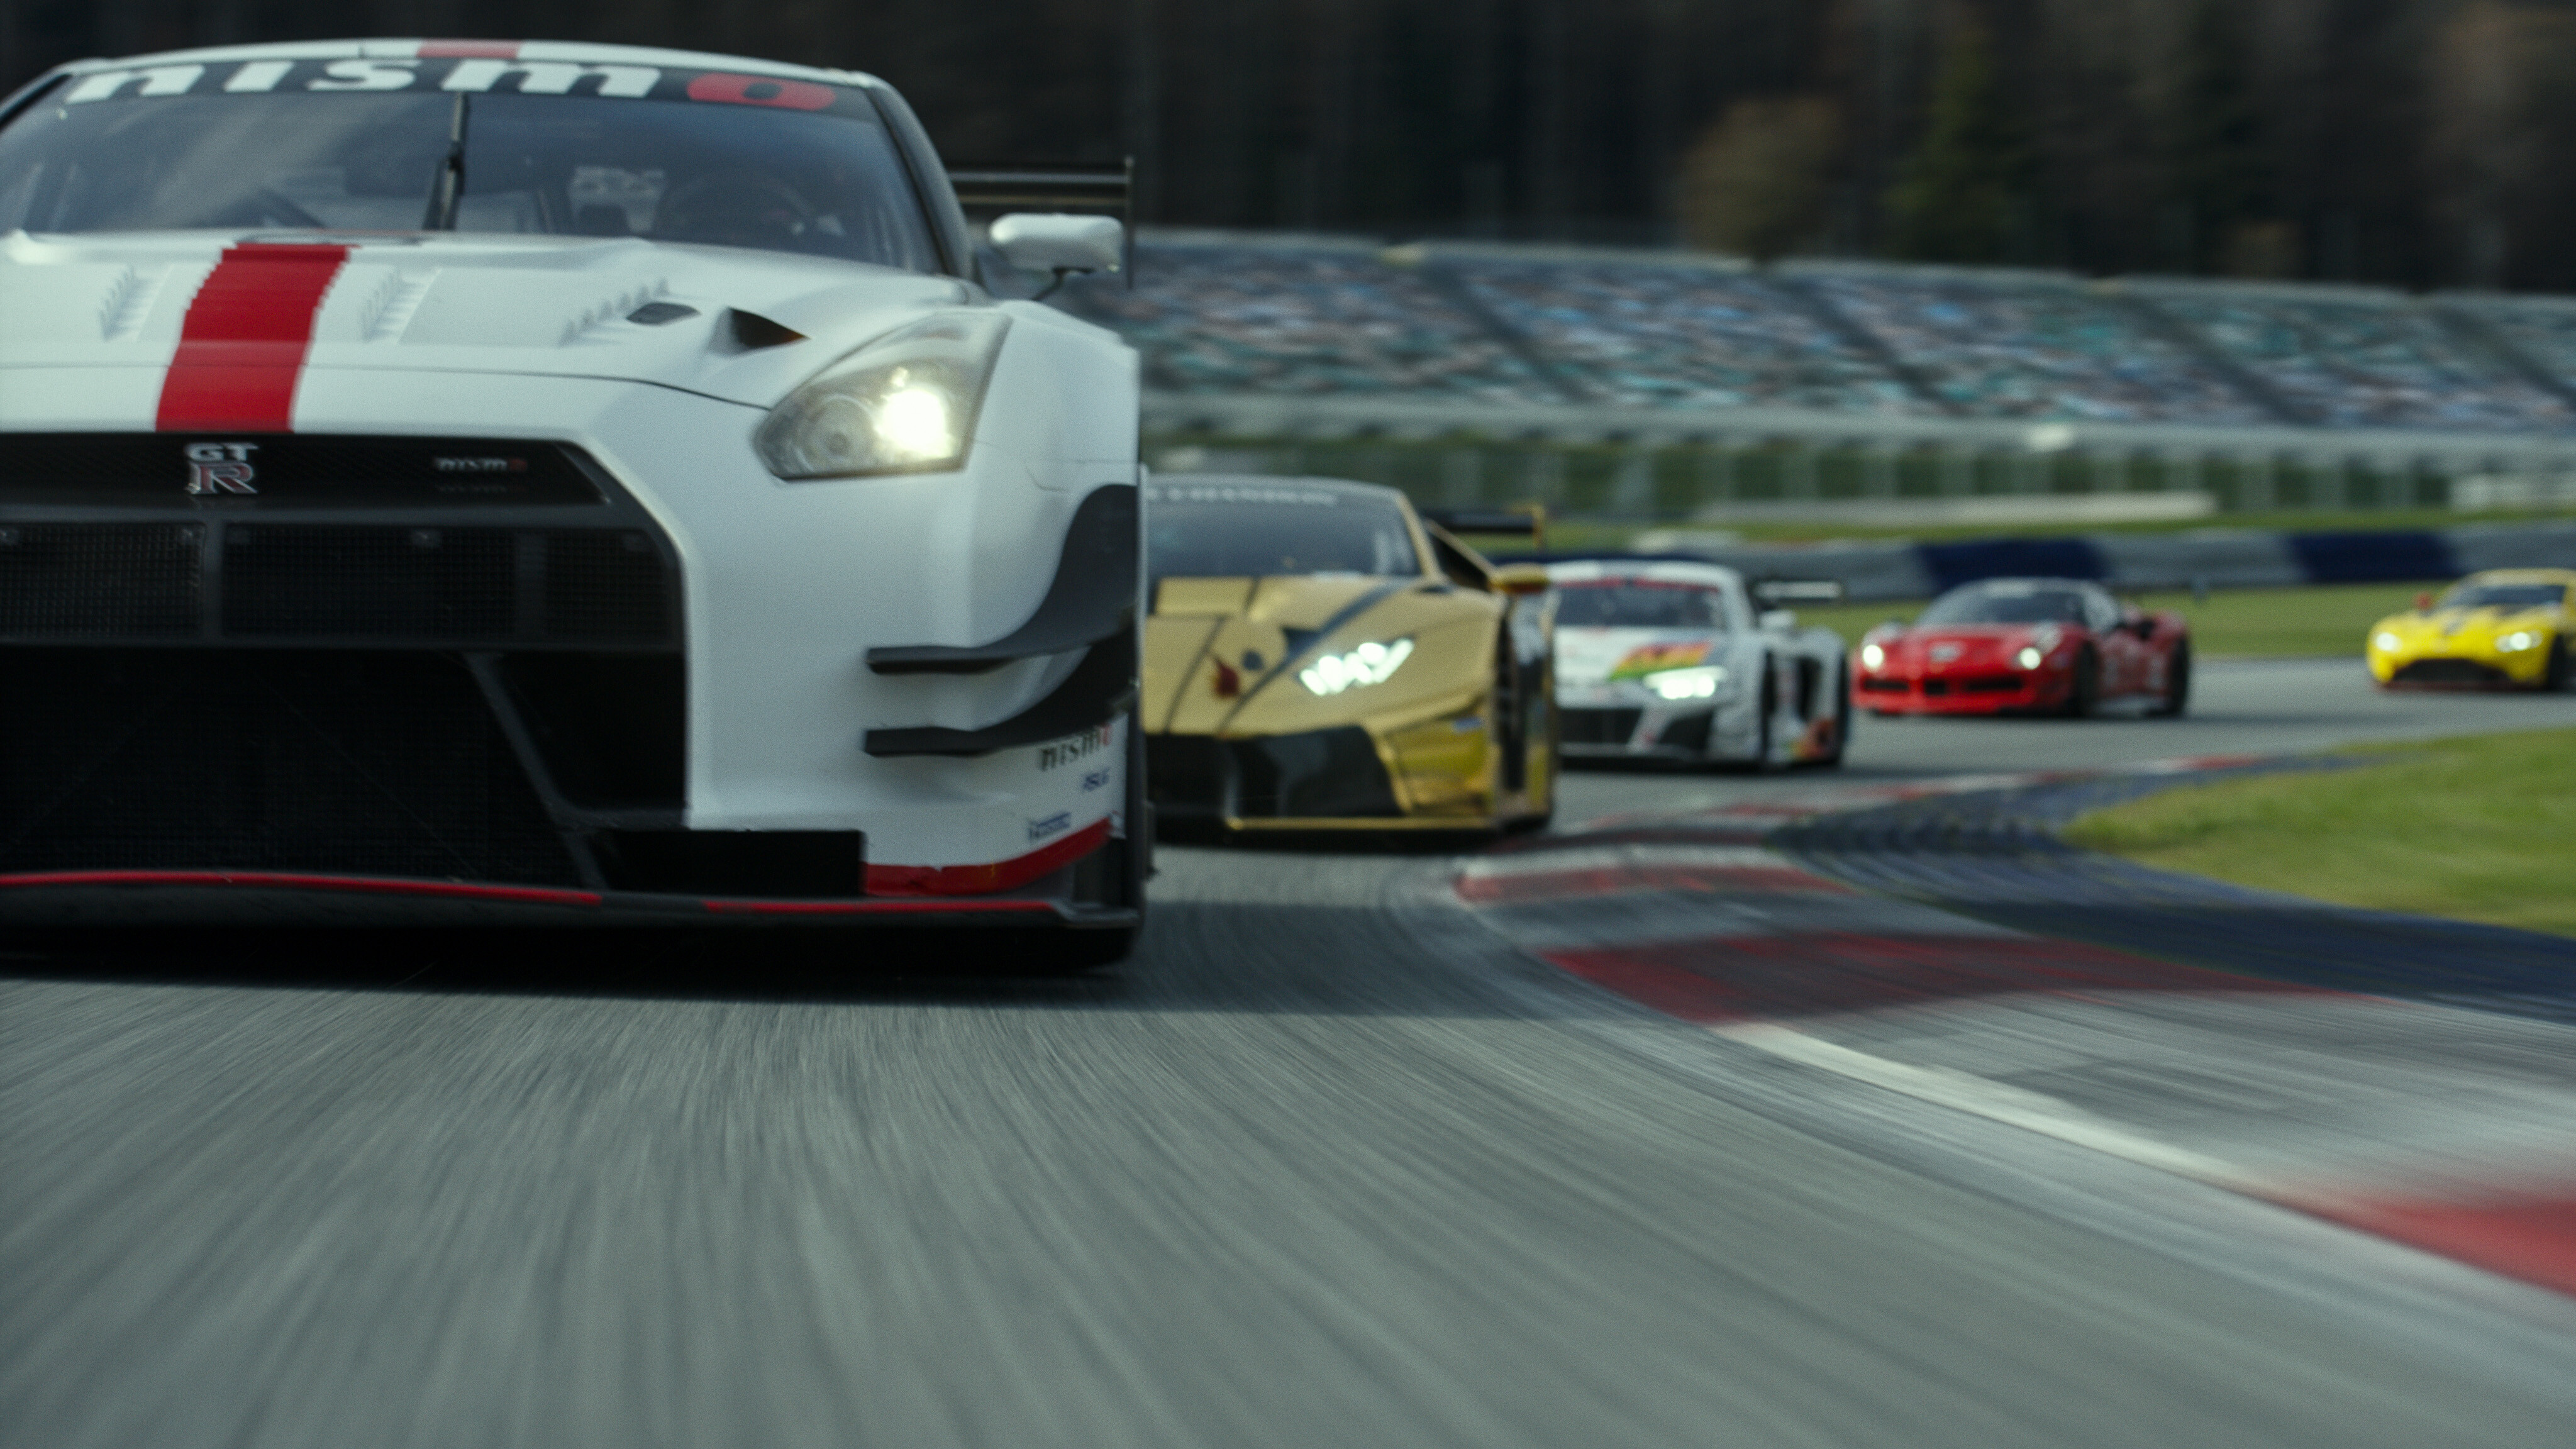 Every Hot Supercar and Race Car We Spotted in the Gran Turismo Movie Trailer